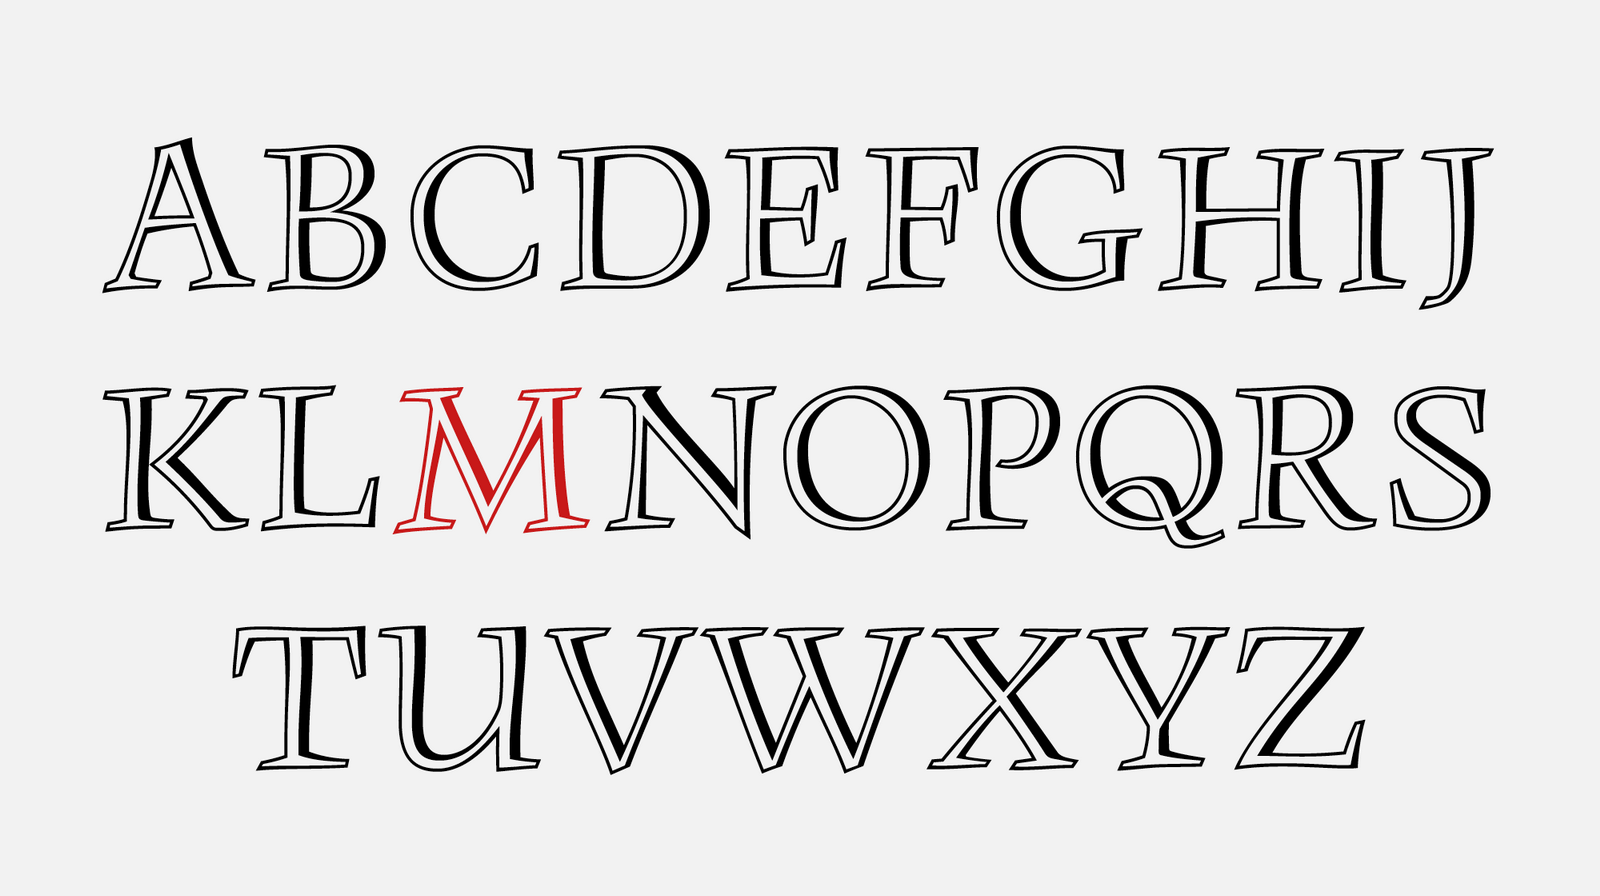 The first digital redrawing of the Monument typeface’s character set, based on pencil drawings. We call this version “authentic” because we did not intervene at all.